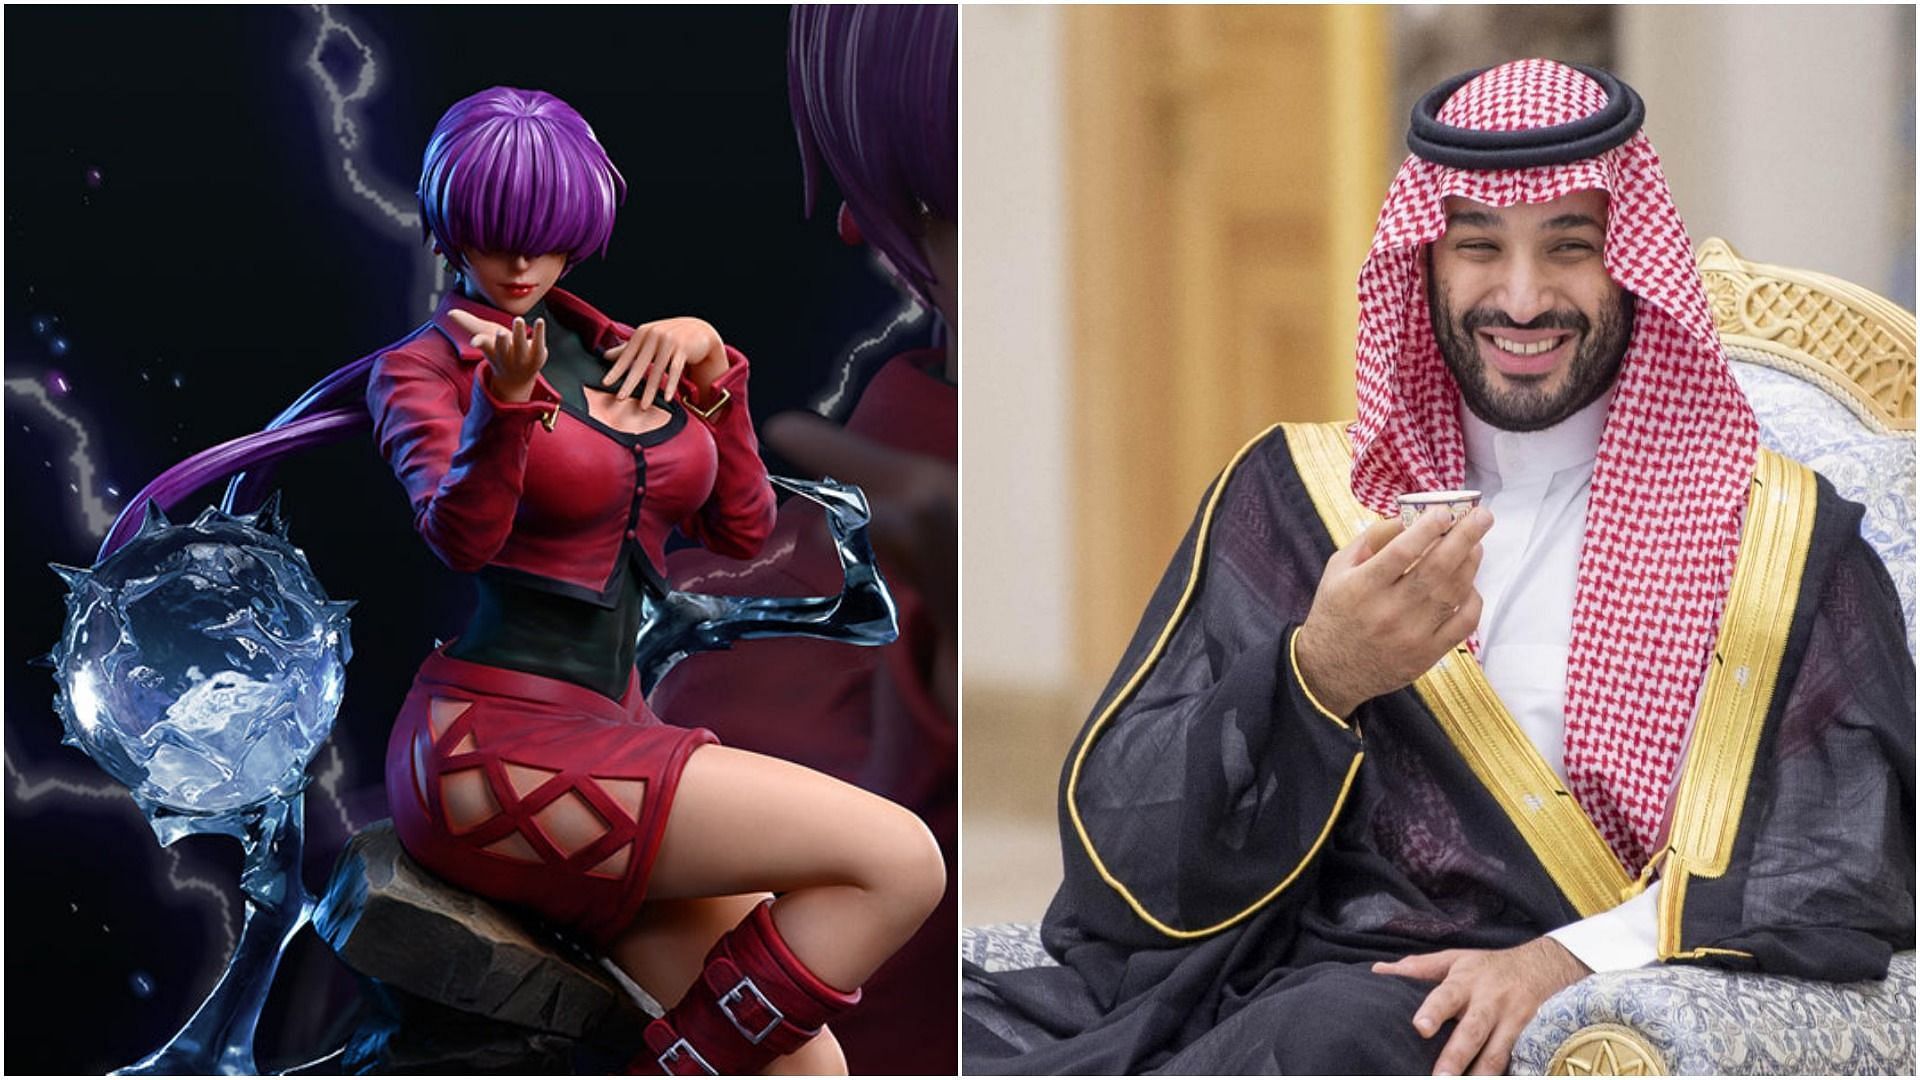 Mohammed bin Salman is now the largest owner of the company which gave King of Fighters (Images via SNK, Getty)